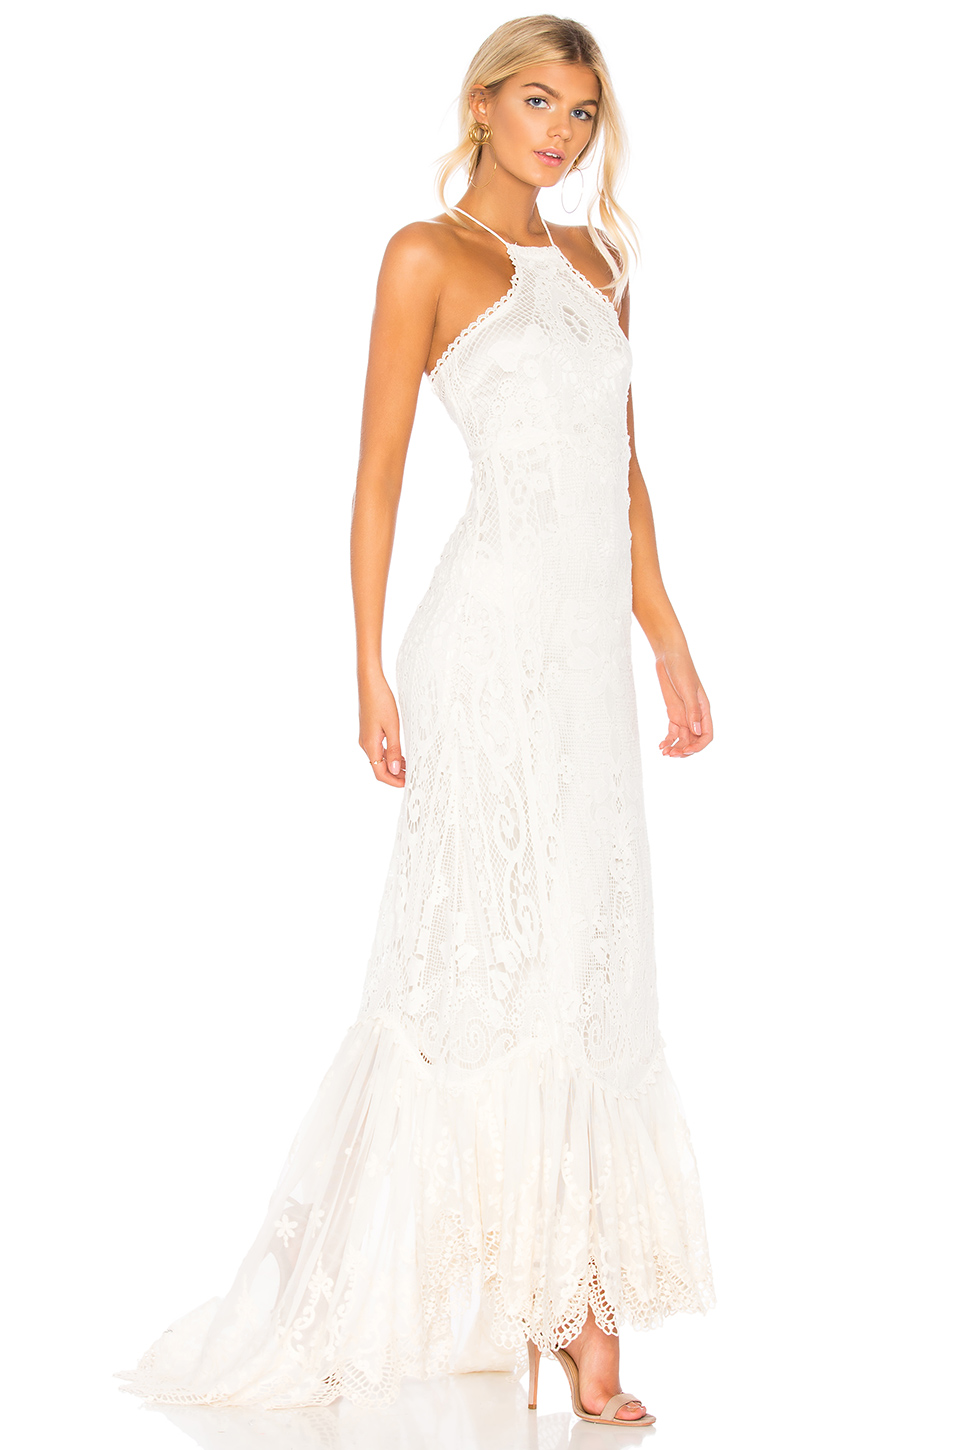 Spell & the Gypsy Collective Casablanca Halter Gown